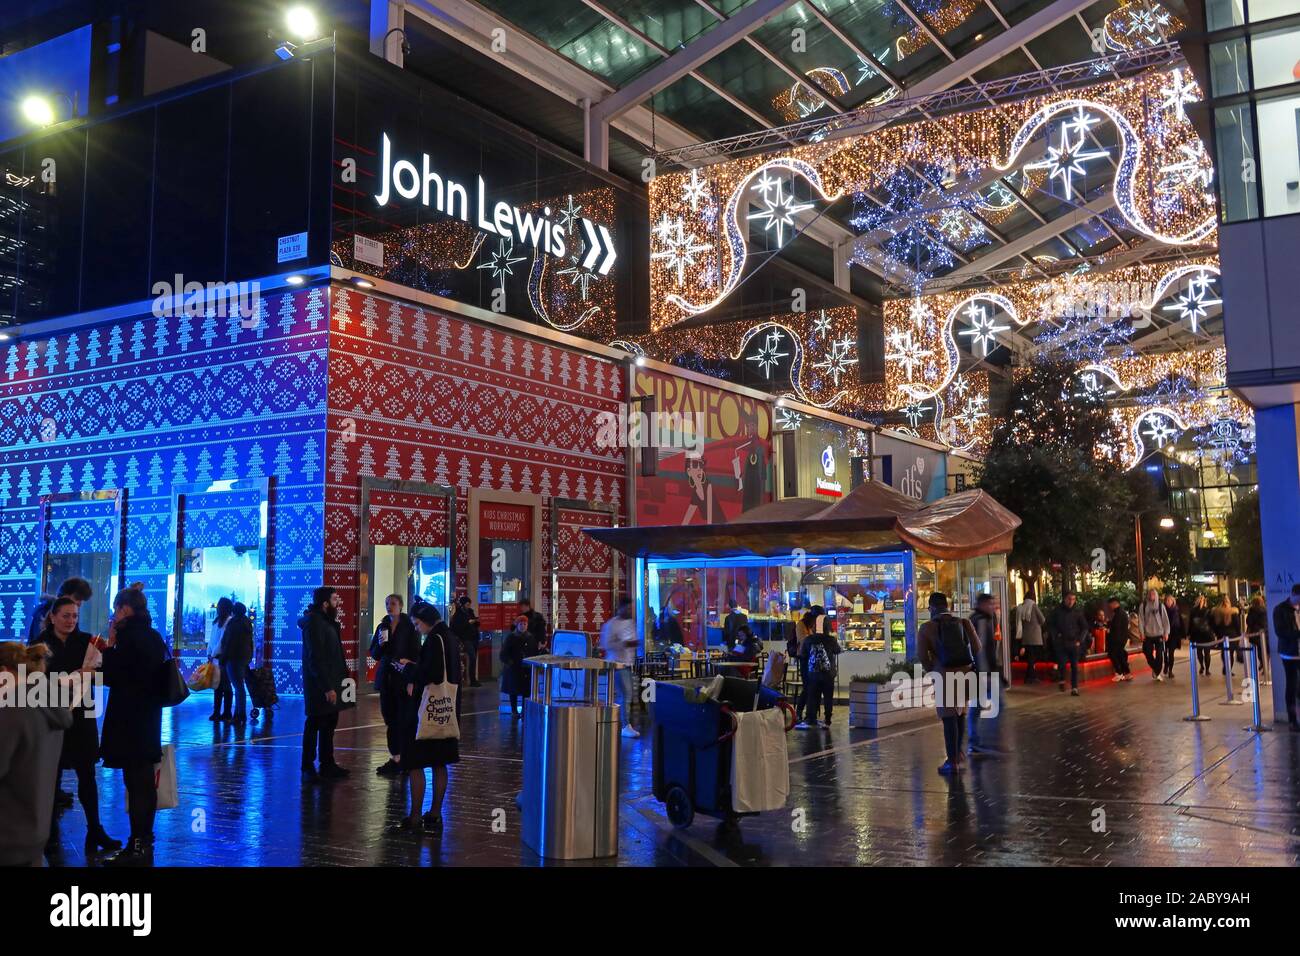 John Lewis, Westfield Stratford City, Olympic Park, Montfichet Rd, Londres, Angleterre, Royaume-Uni, E 20 1 Ej Banque D'Images